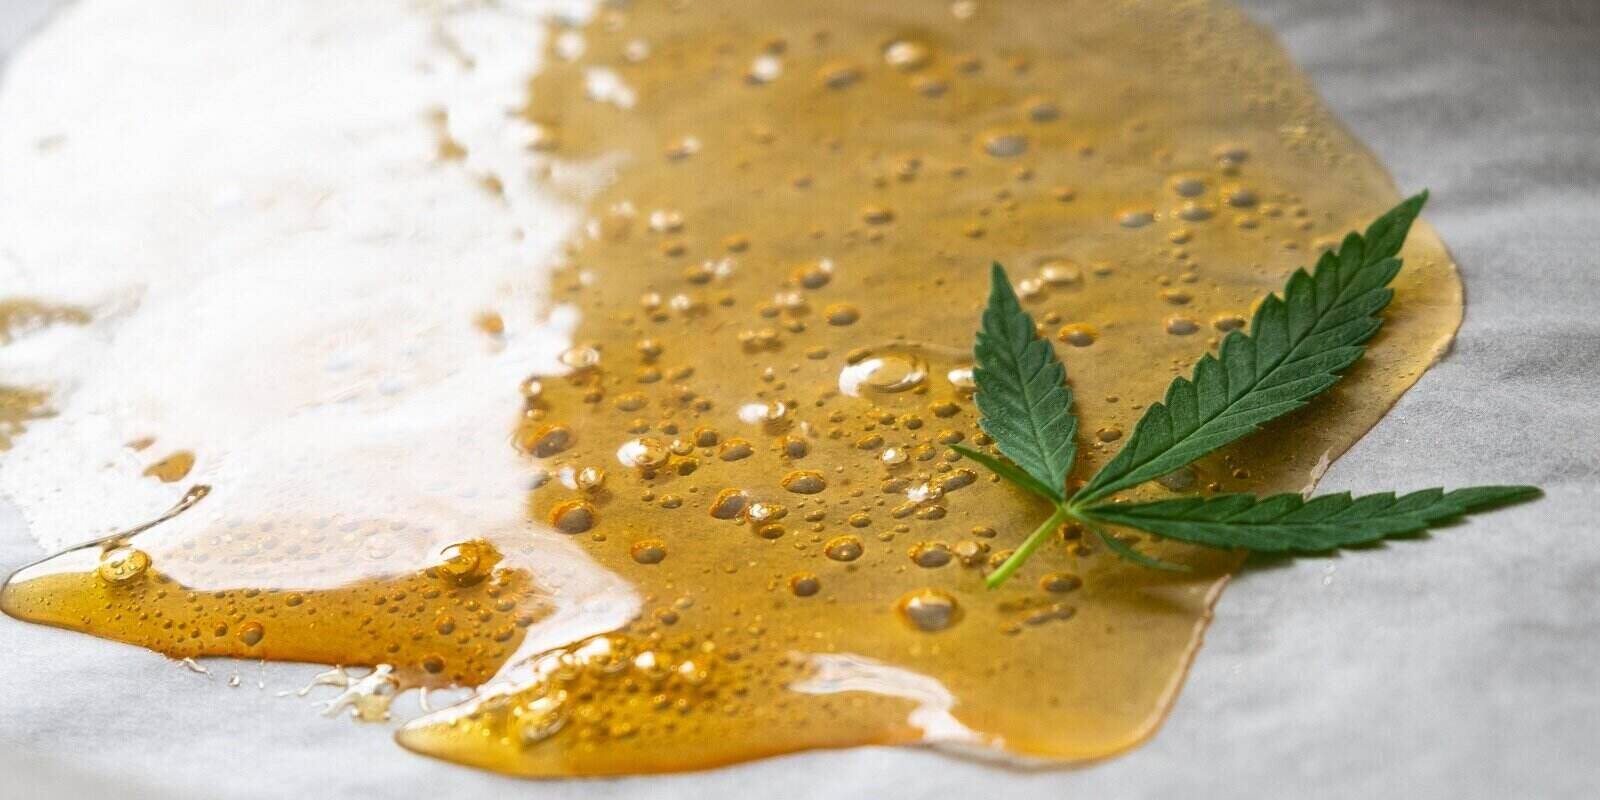 strong extract of gold cannabis wax with high thc close up